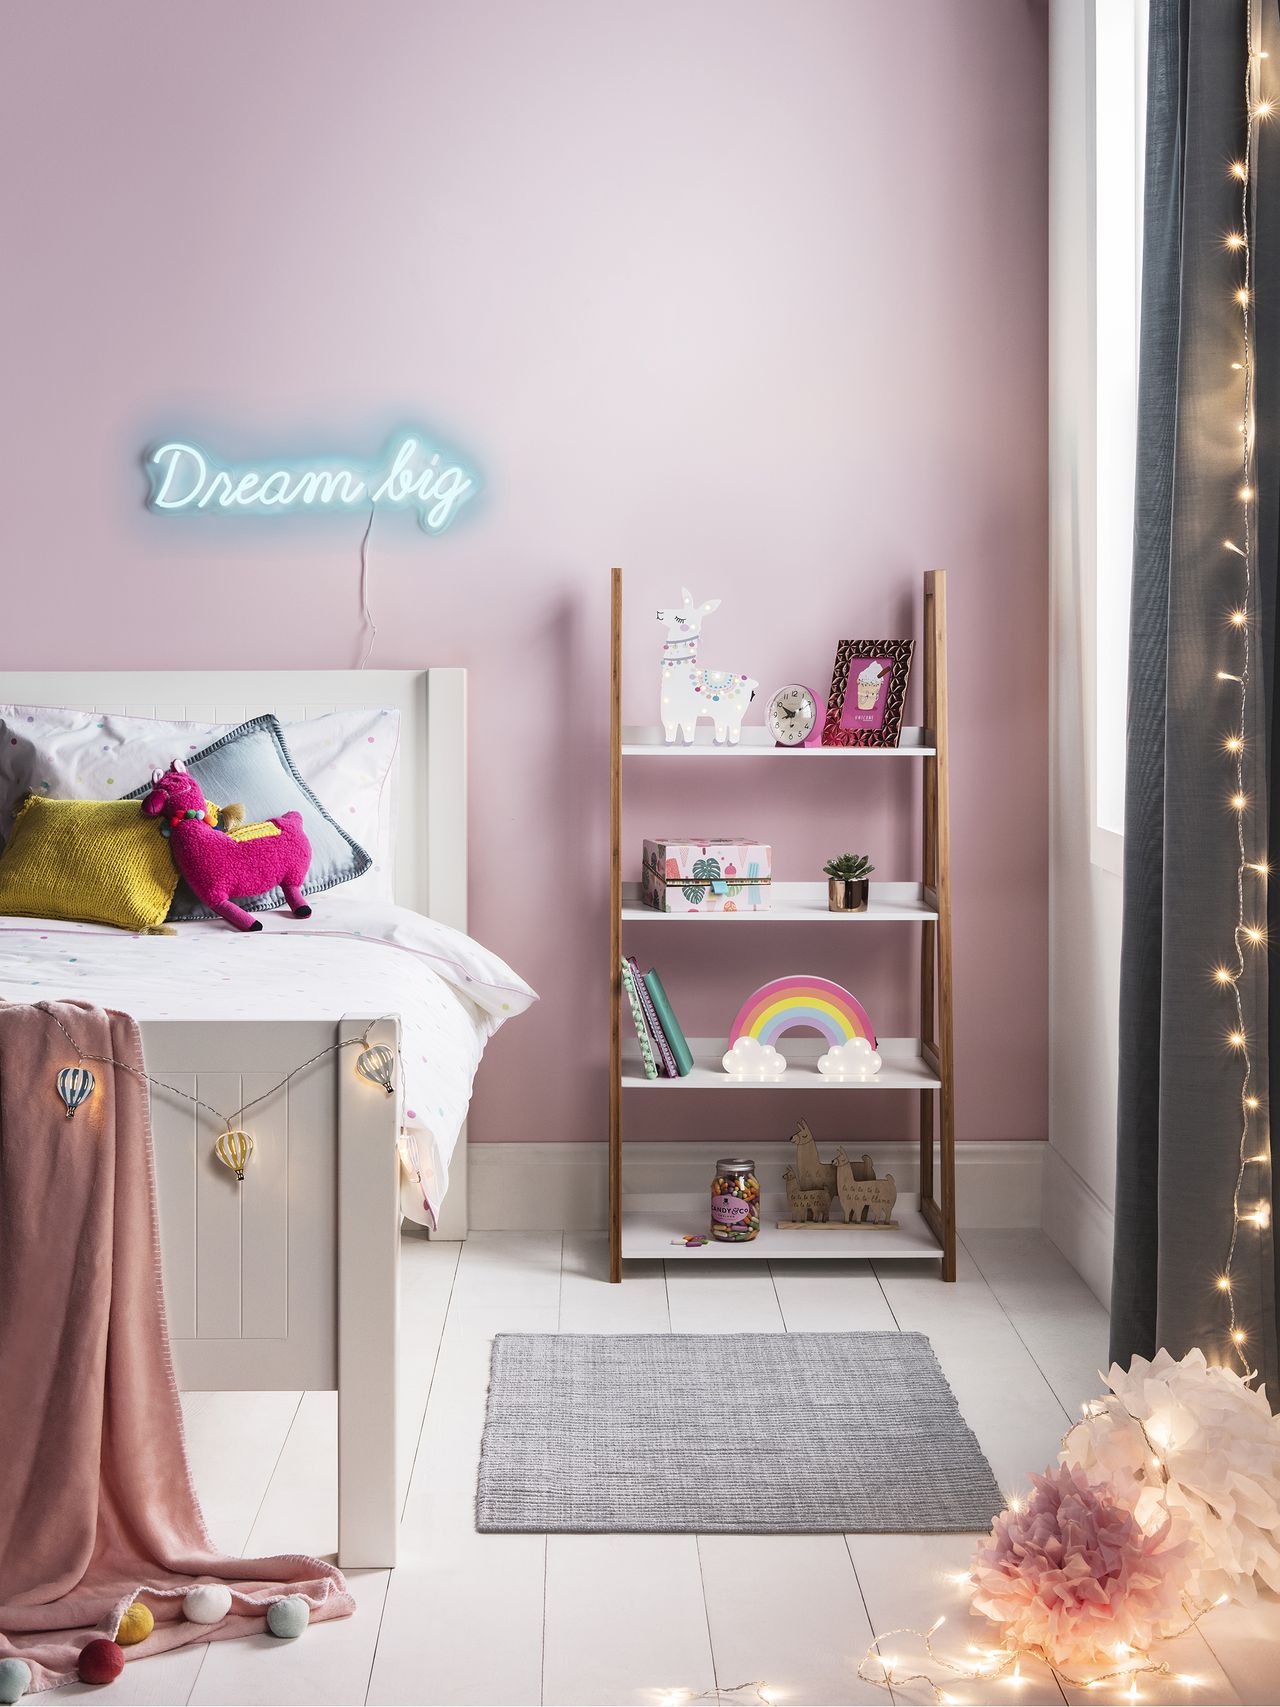 Small kids' bedroom ideas: 22 fun ways to enhance your child's small ...